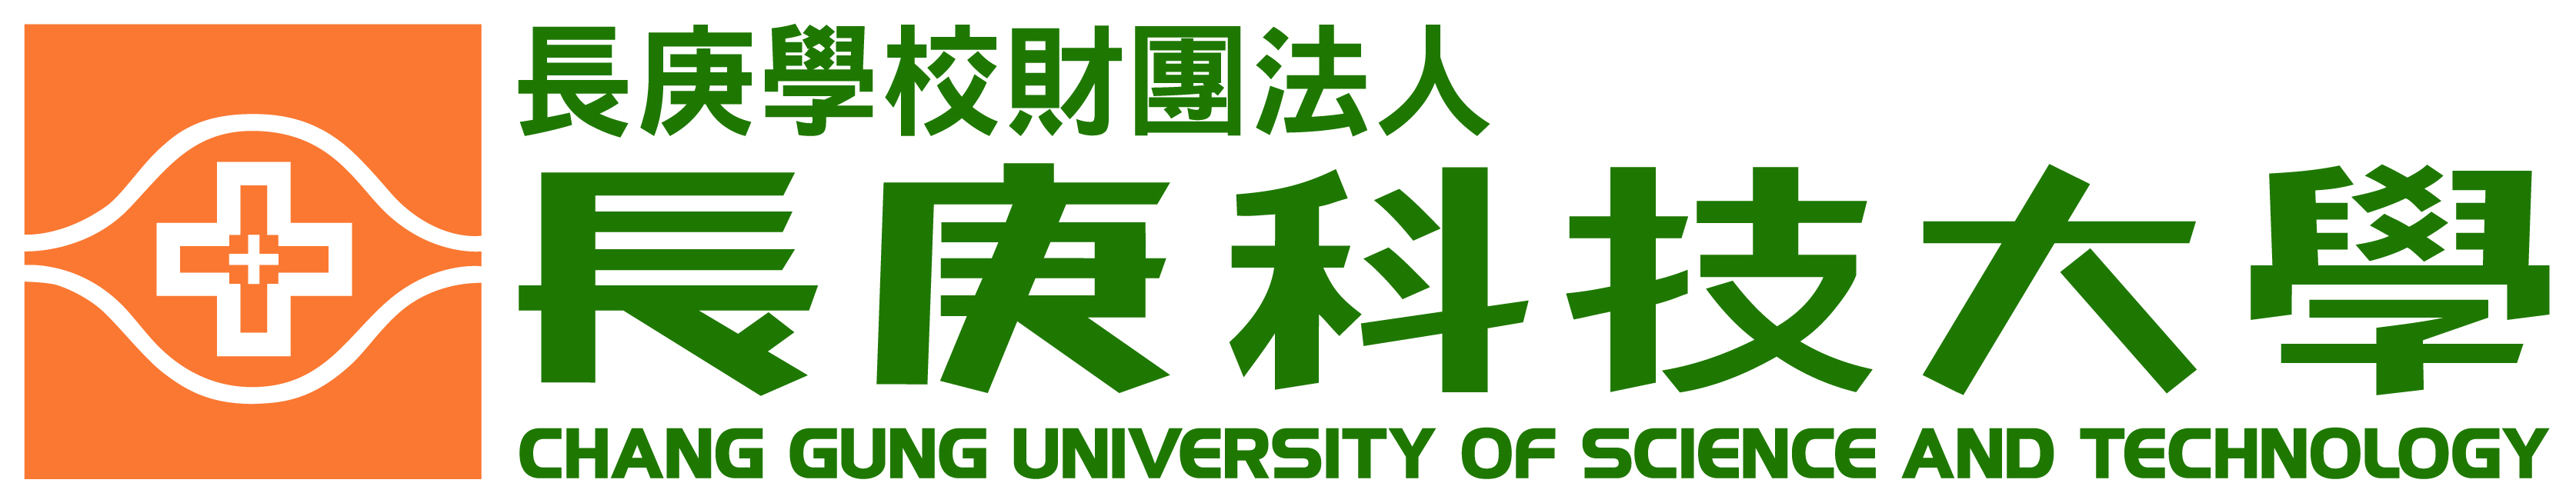 Chang Gung University of Science of Technology